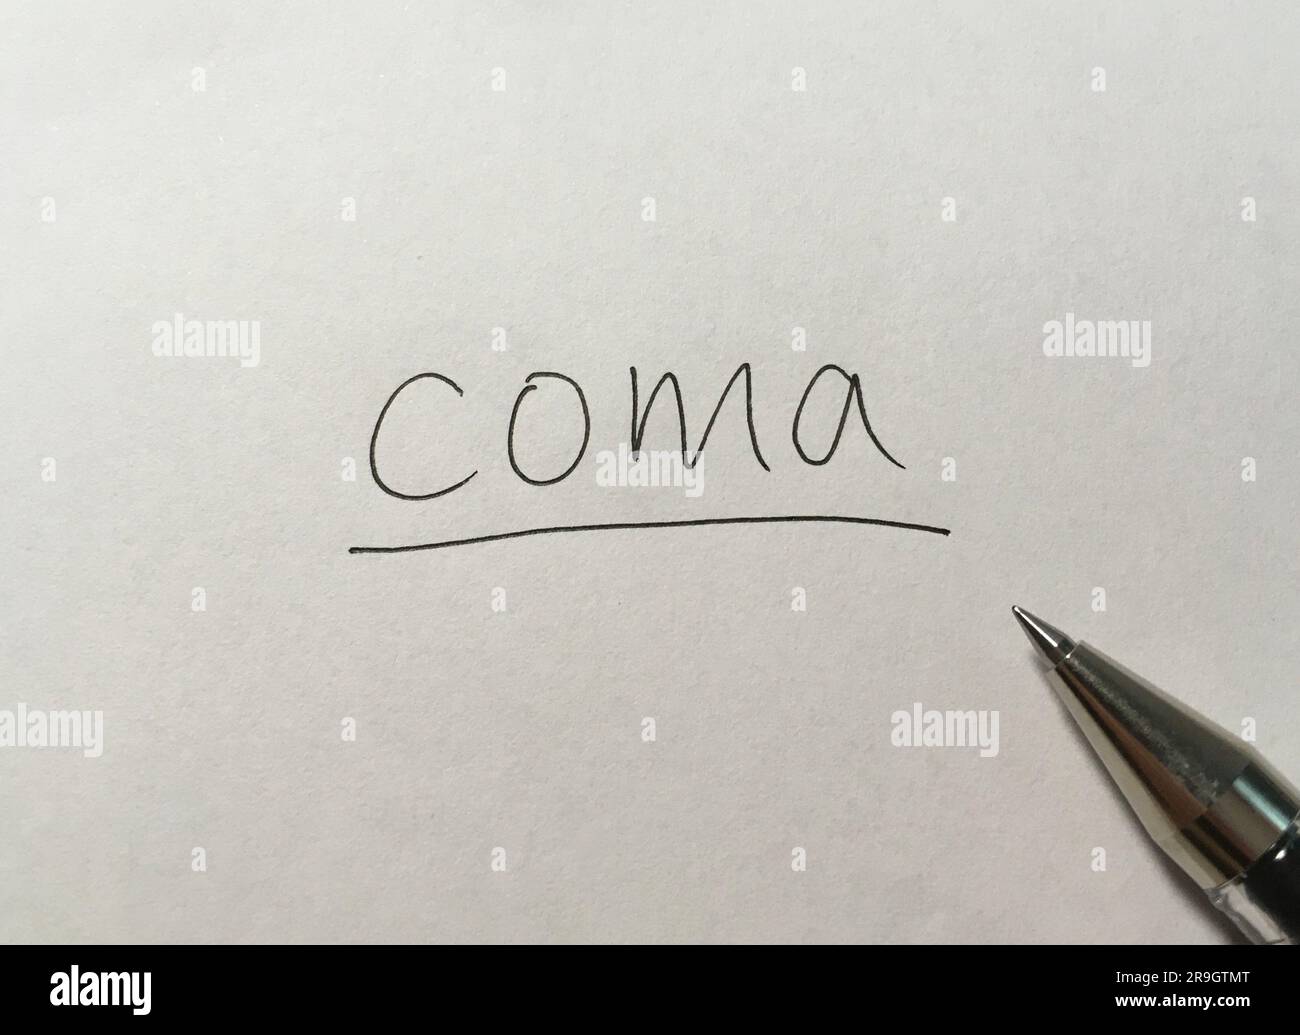 Coma concept word on paper background Stock Photo